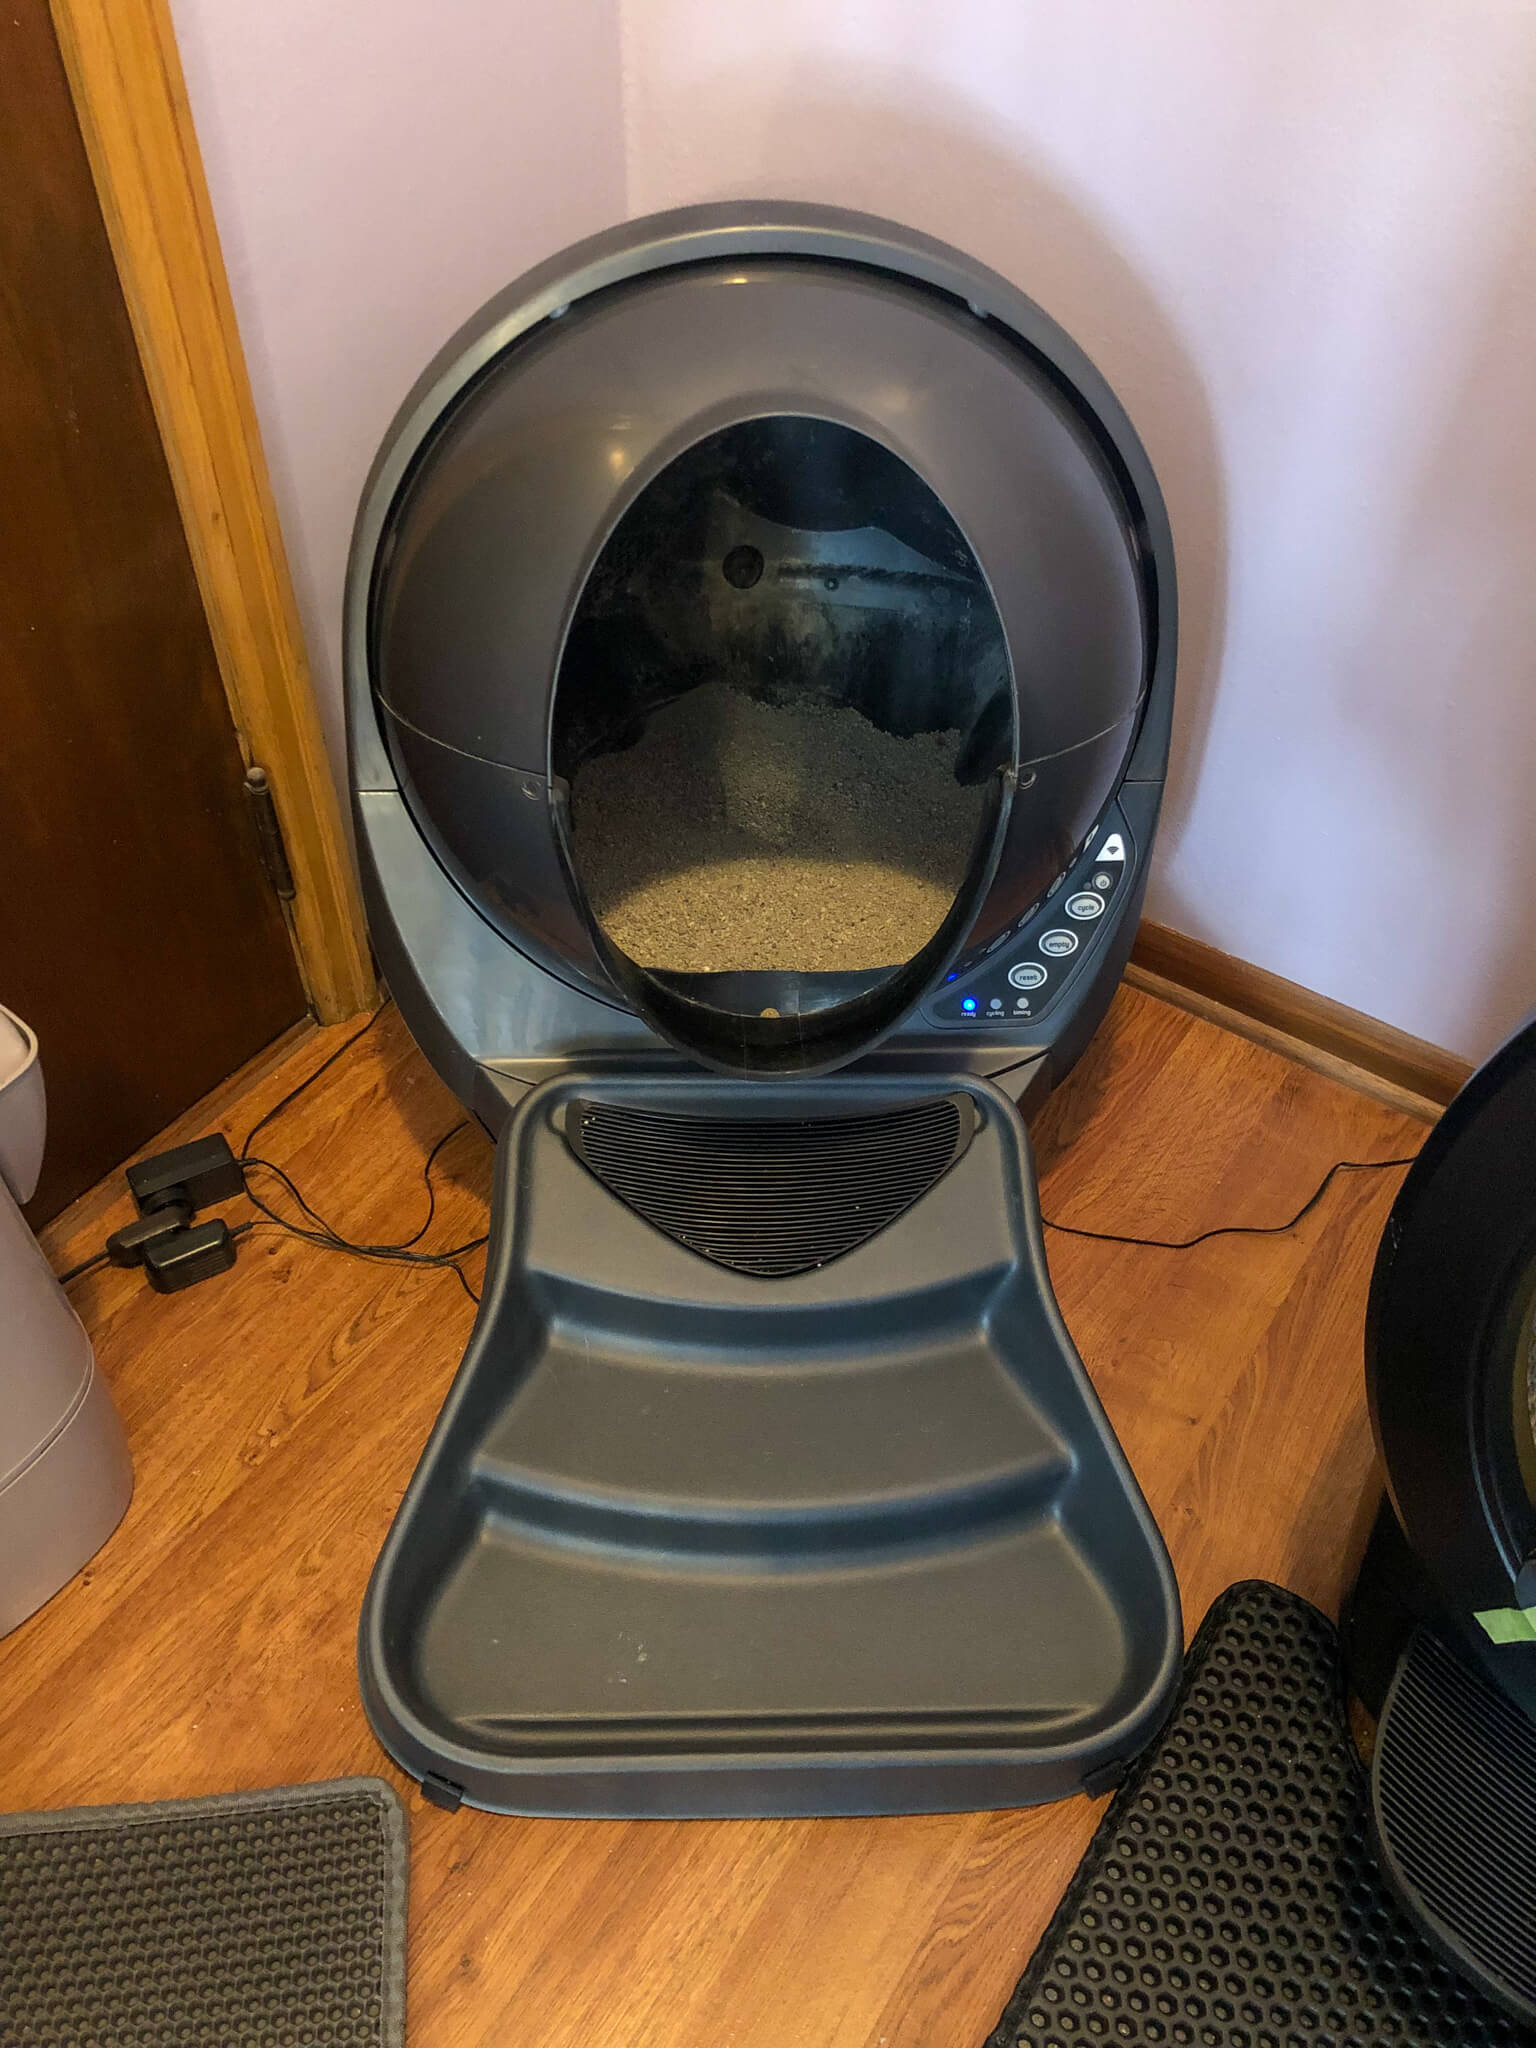 Litter Robot Connect 3 litter box with ramp for cat to walk up into it in a corner of a room.